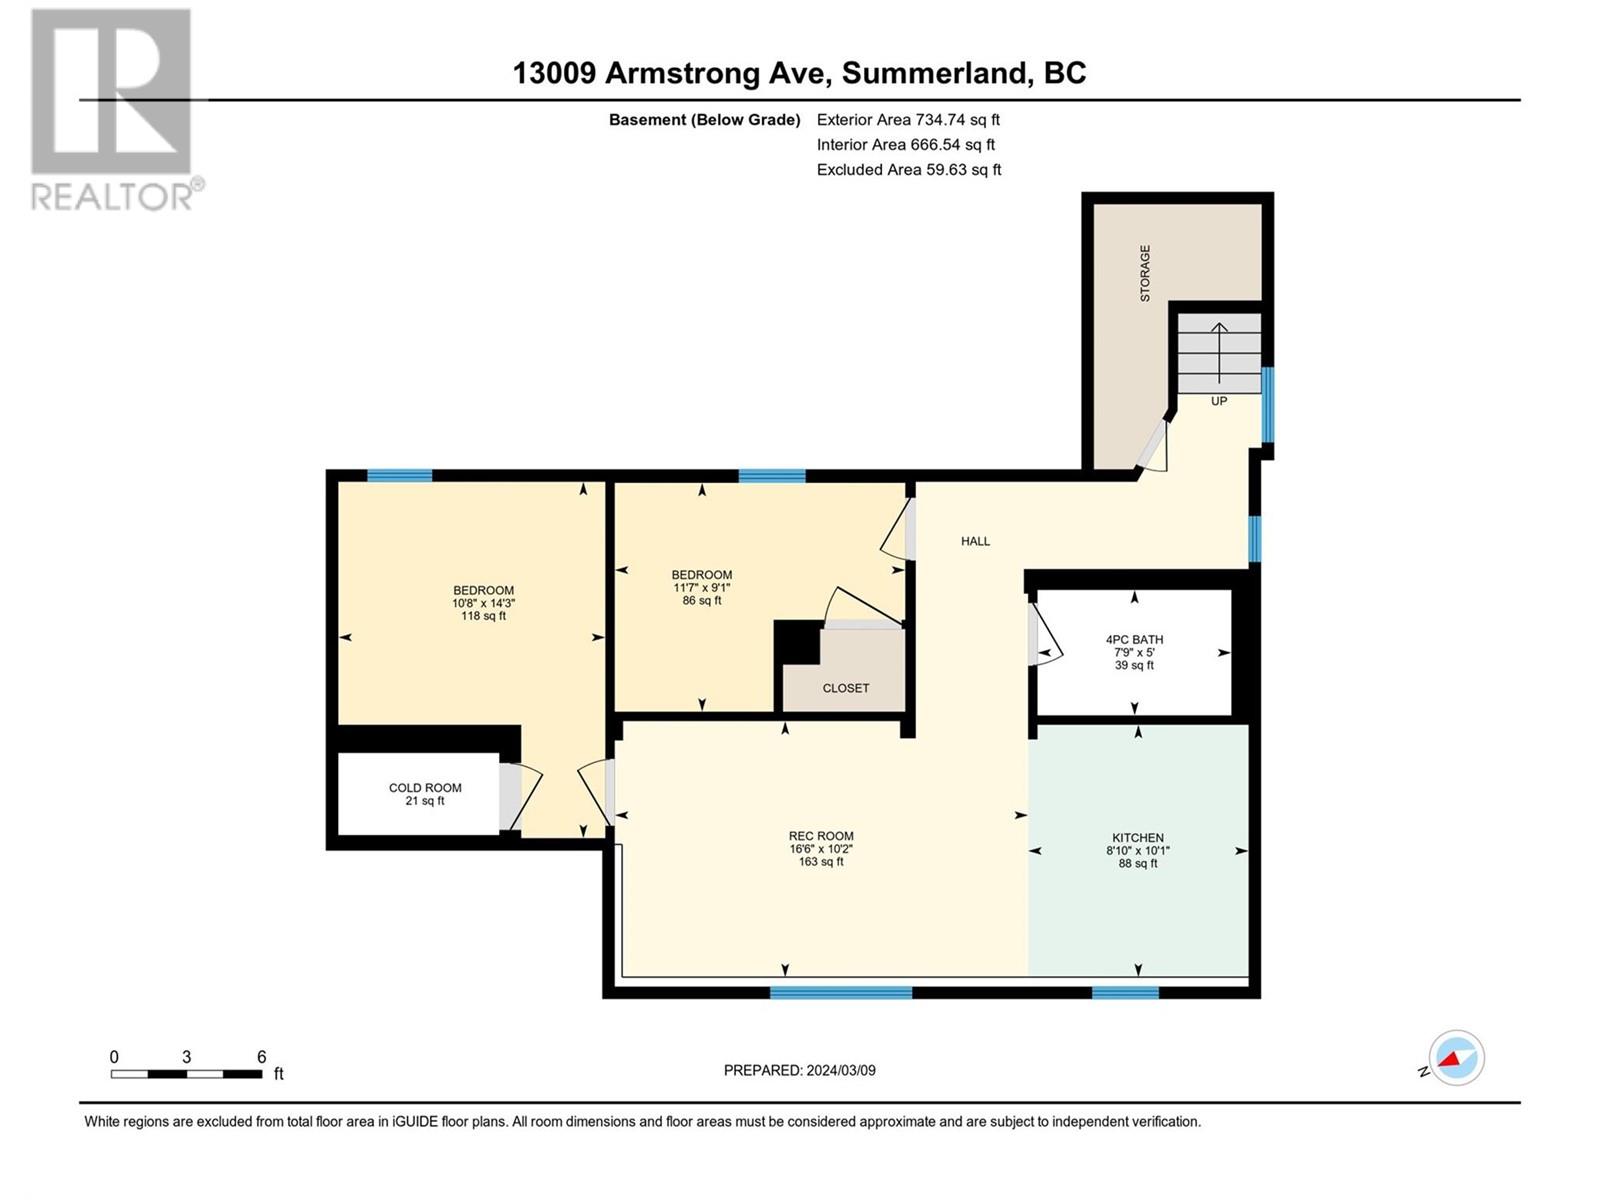 13009 Armstrong Avenue Summerland